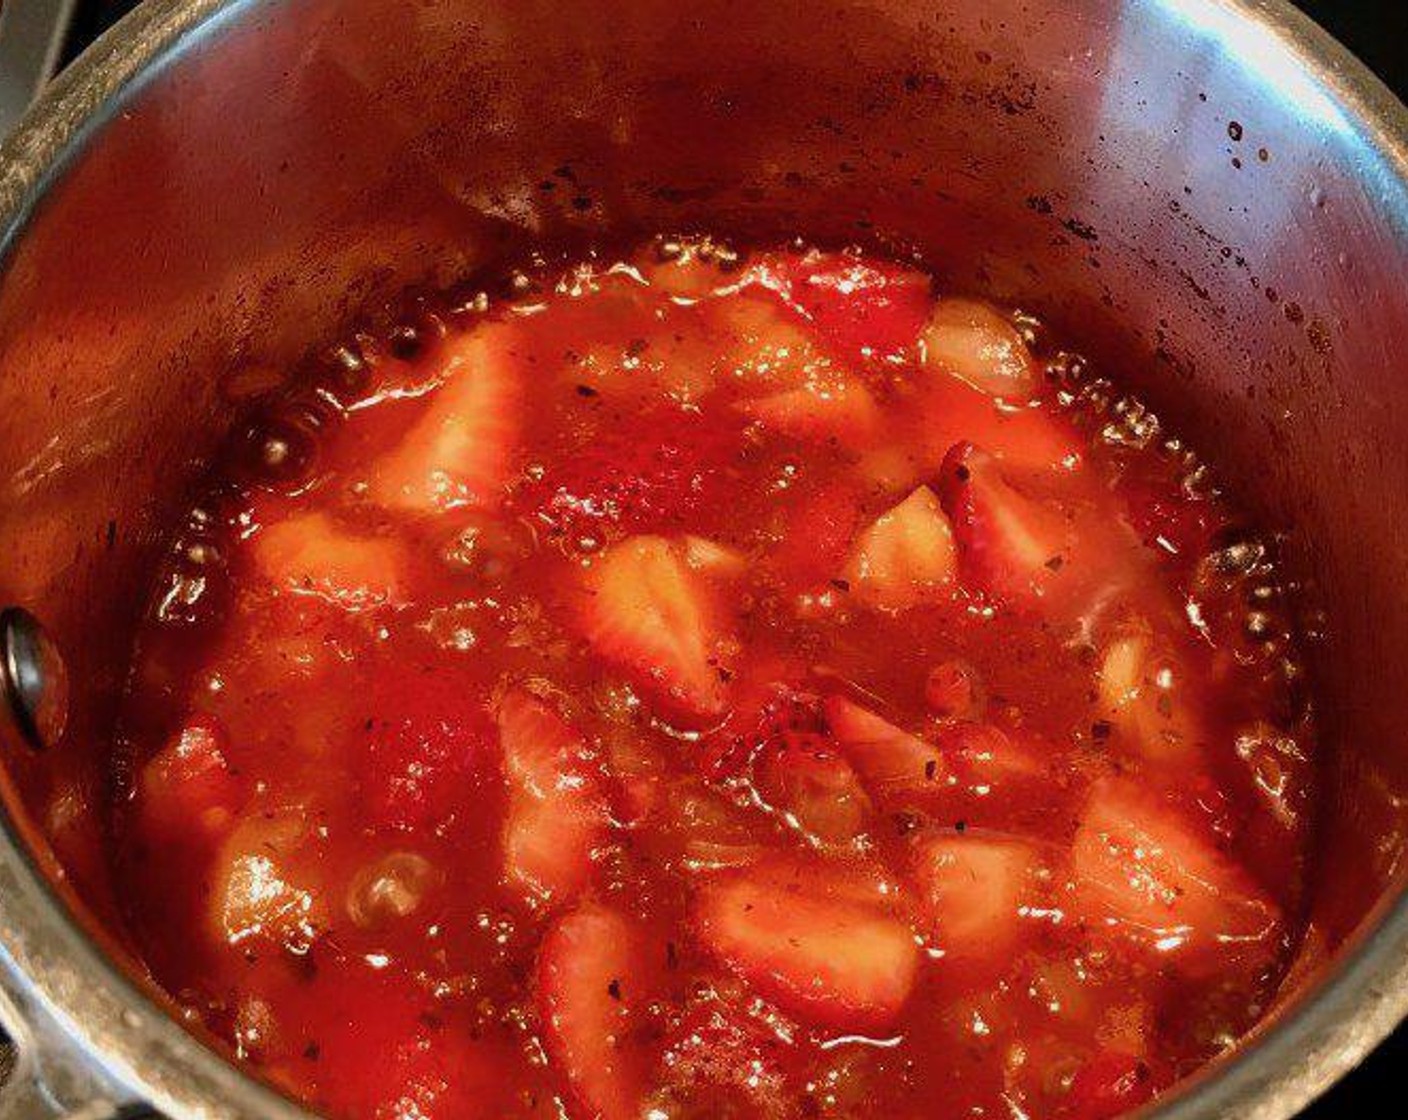 step 7 Add in Fresh Strawberries (2 cups), stir and bring to a boil. Once you’ve reached a boil, reduce heat to simmer and simmer for 10 to15 minutes, stirring every minute or so. Your strawberries should boil down, but you may wish to use a masher or immersion blender to achieve desired consistency. Remove from heat before doing so!